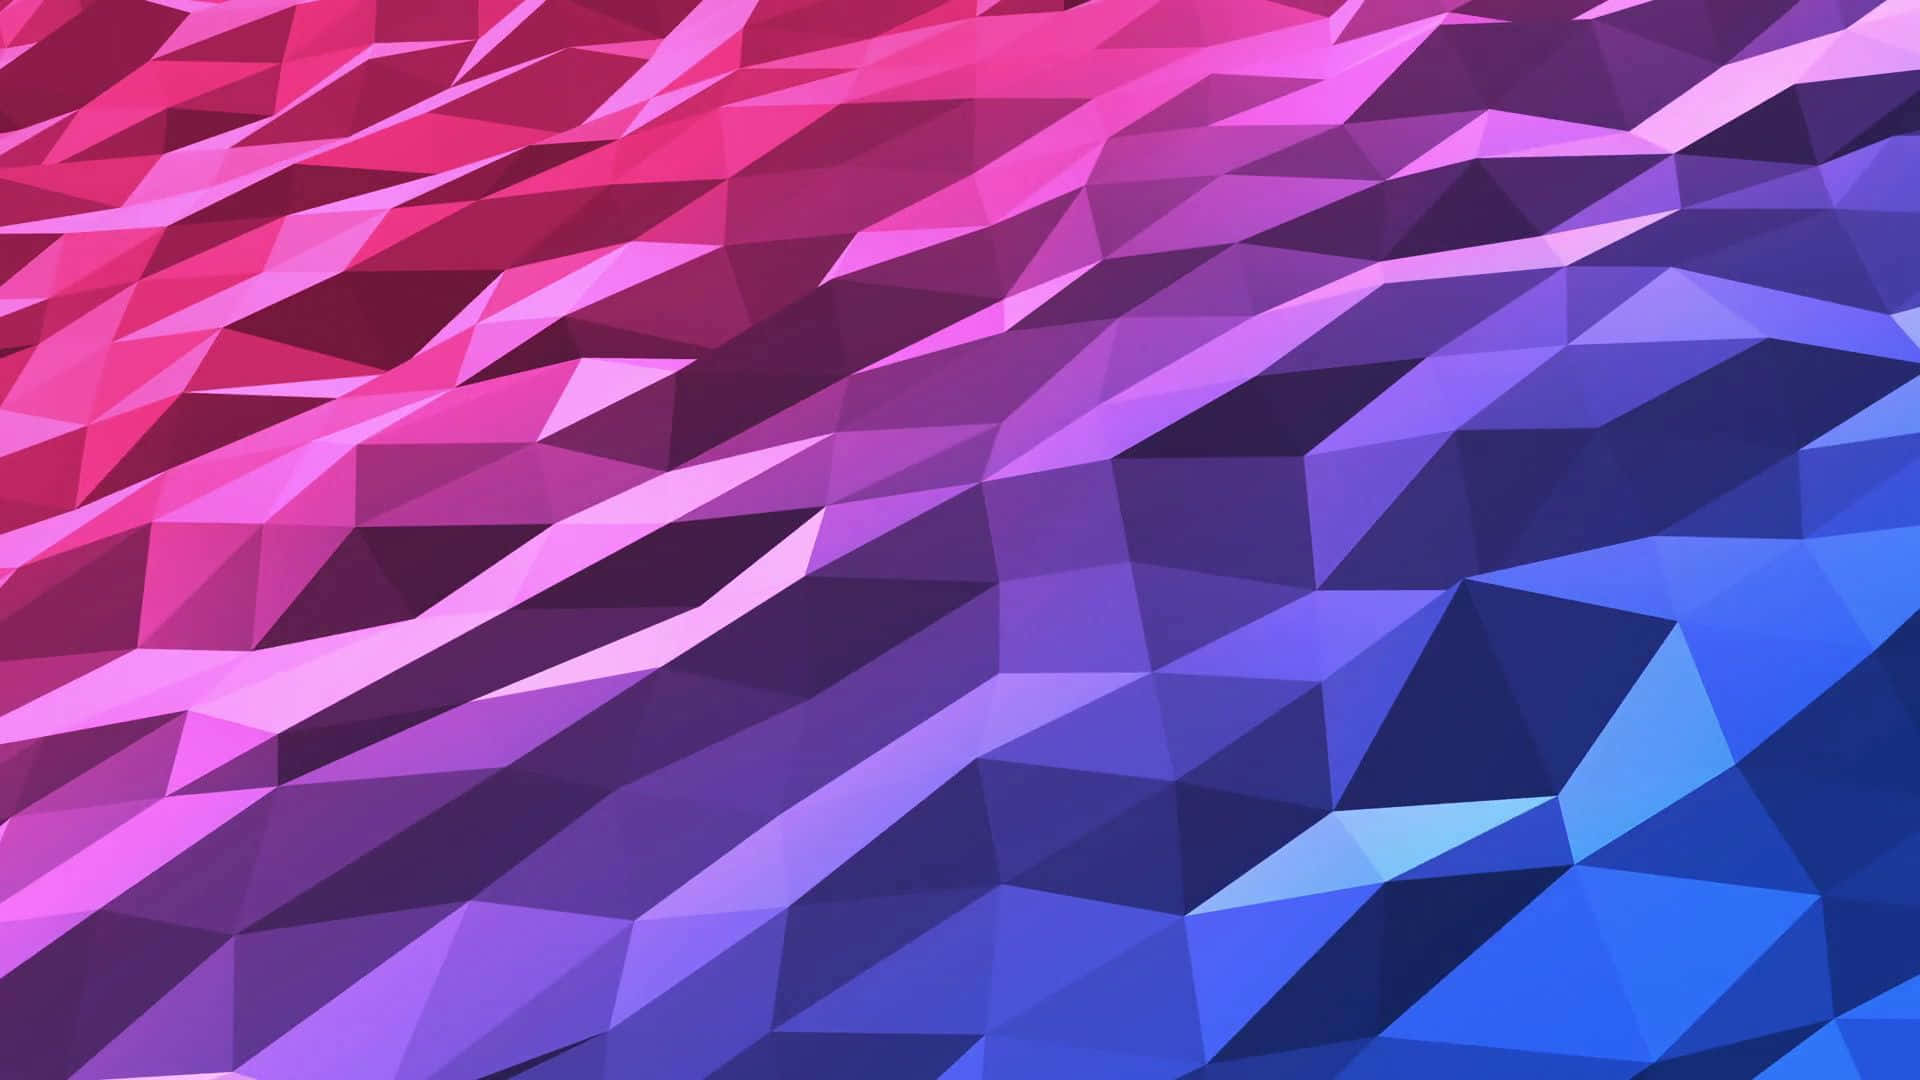 Abstract blue and purple colored desktop background Wallpaper